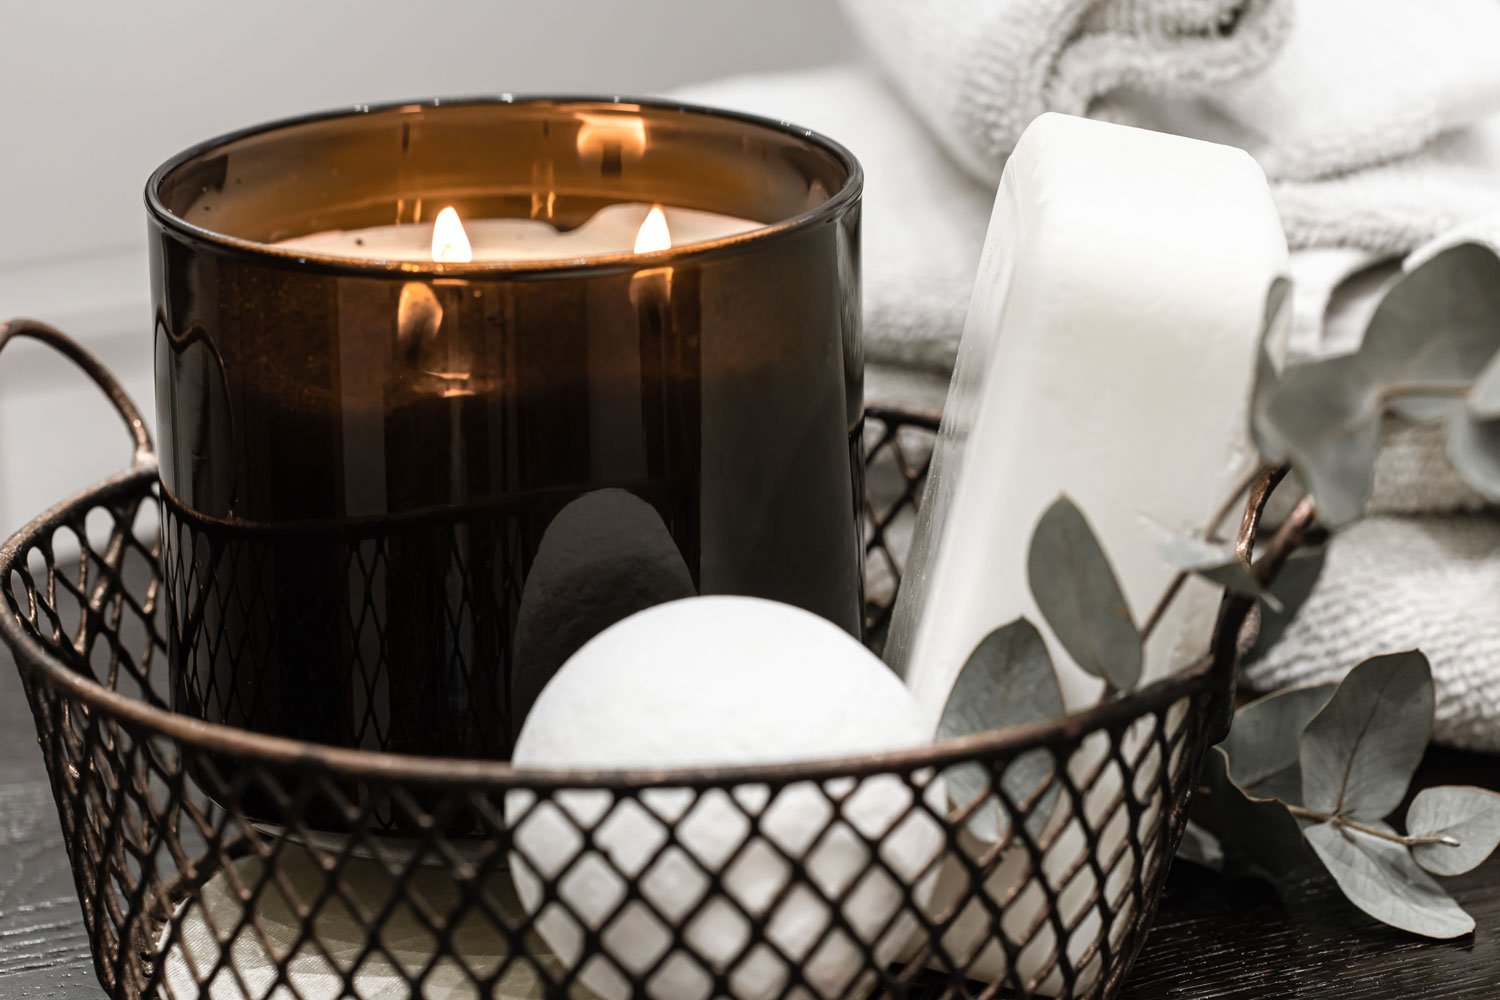 bath-accessories-burning-candle-body-care-hygiene-concept.jpg